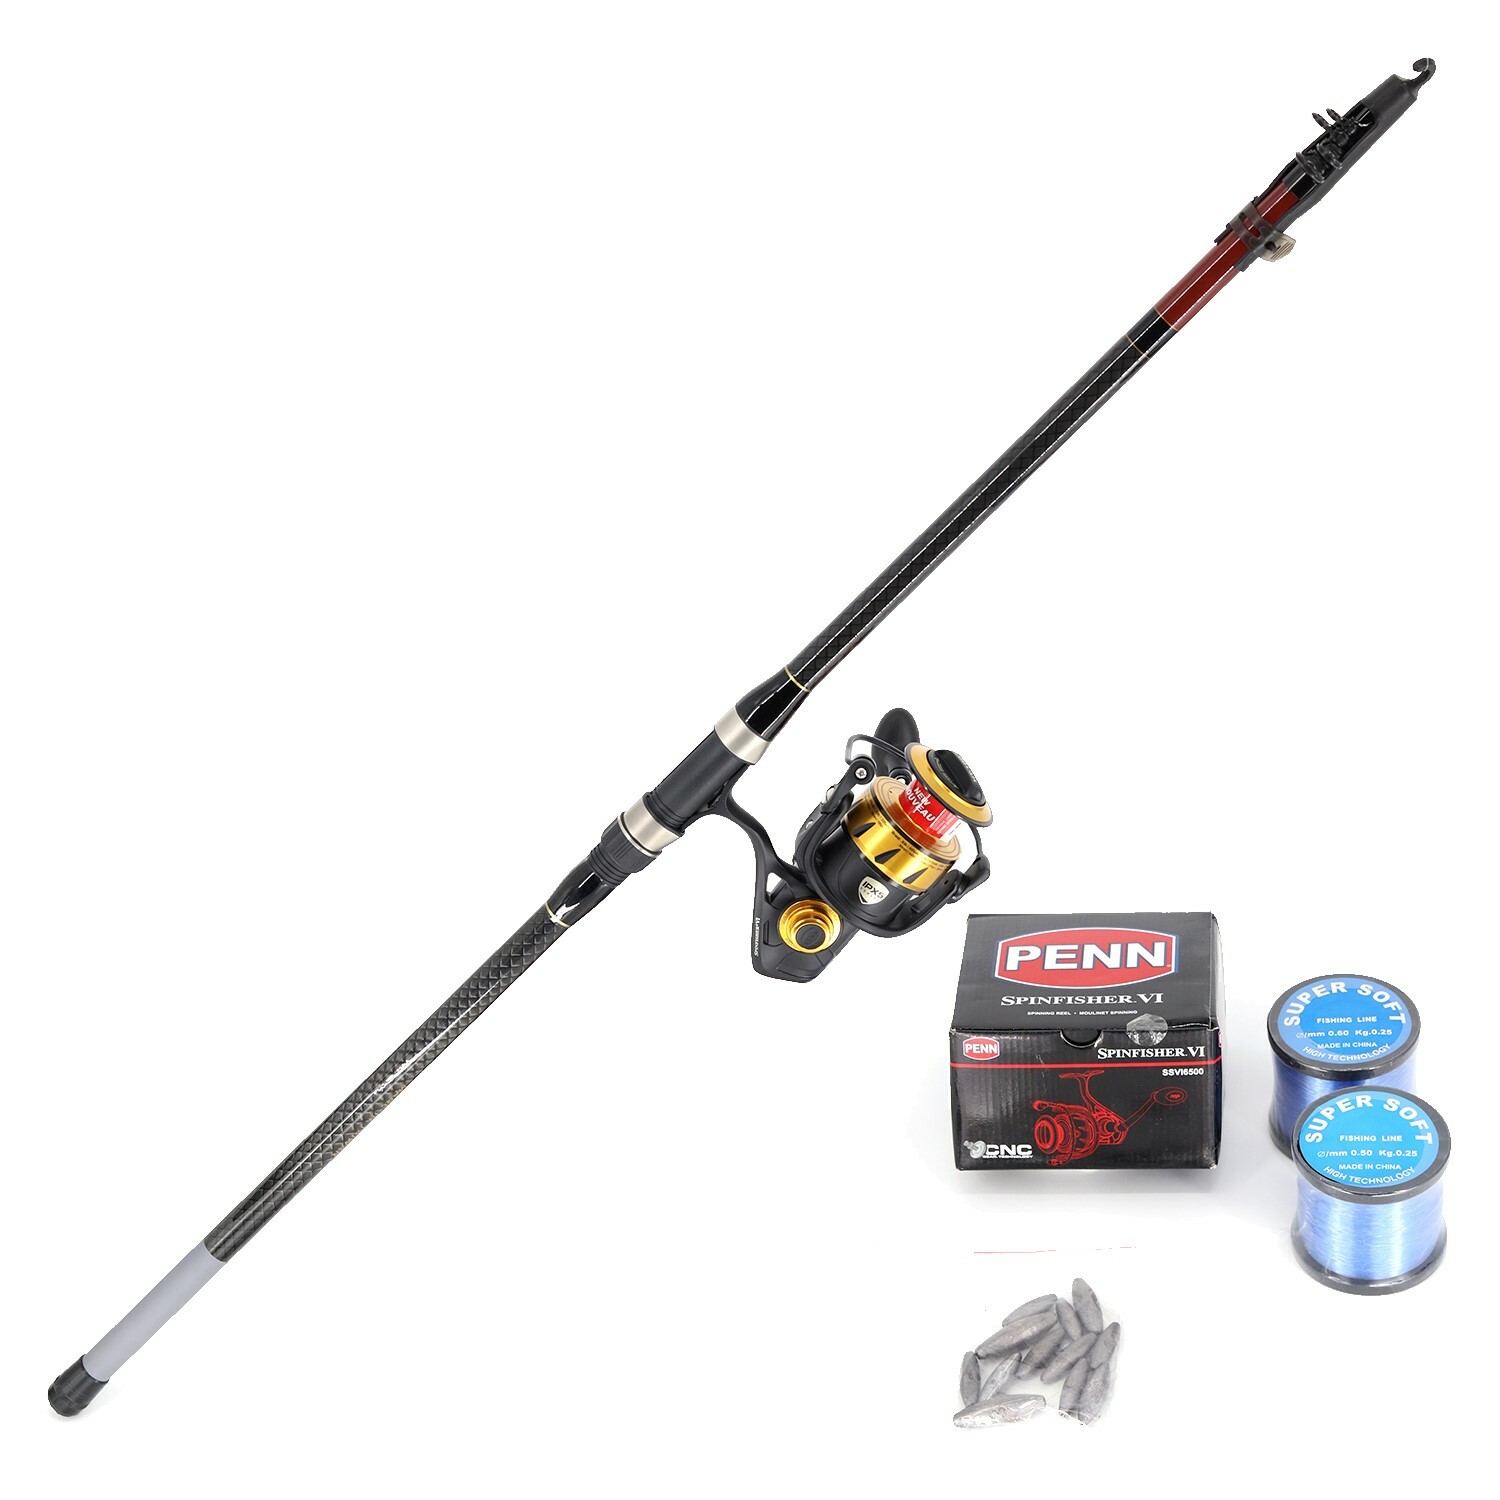 Shore Fishing (Pilot 3m and Penn VI 6500 including Nylon line with rigs and sinkers and snap swivels) Combo